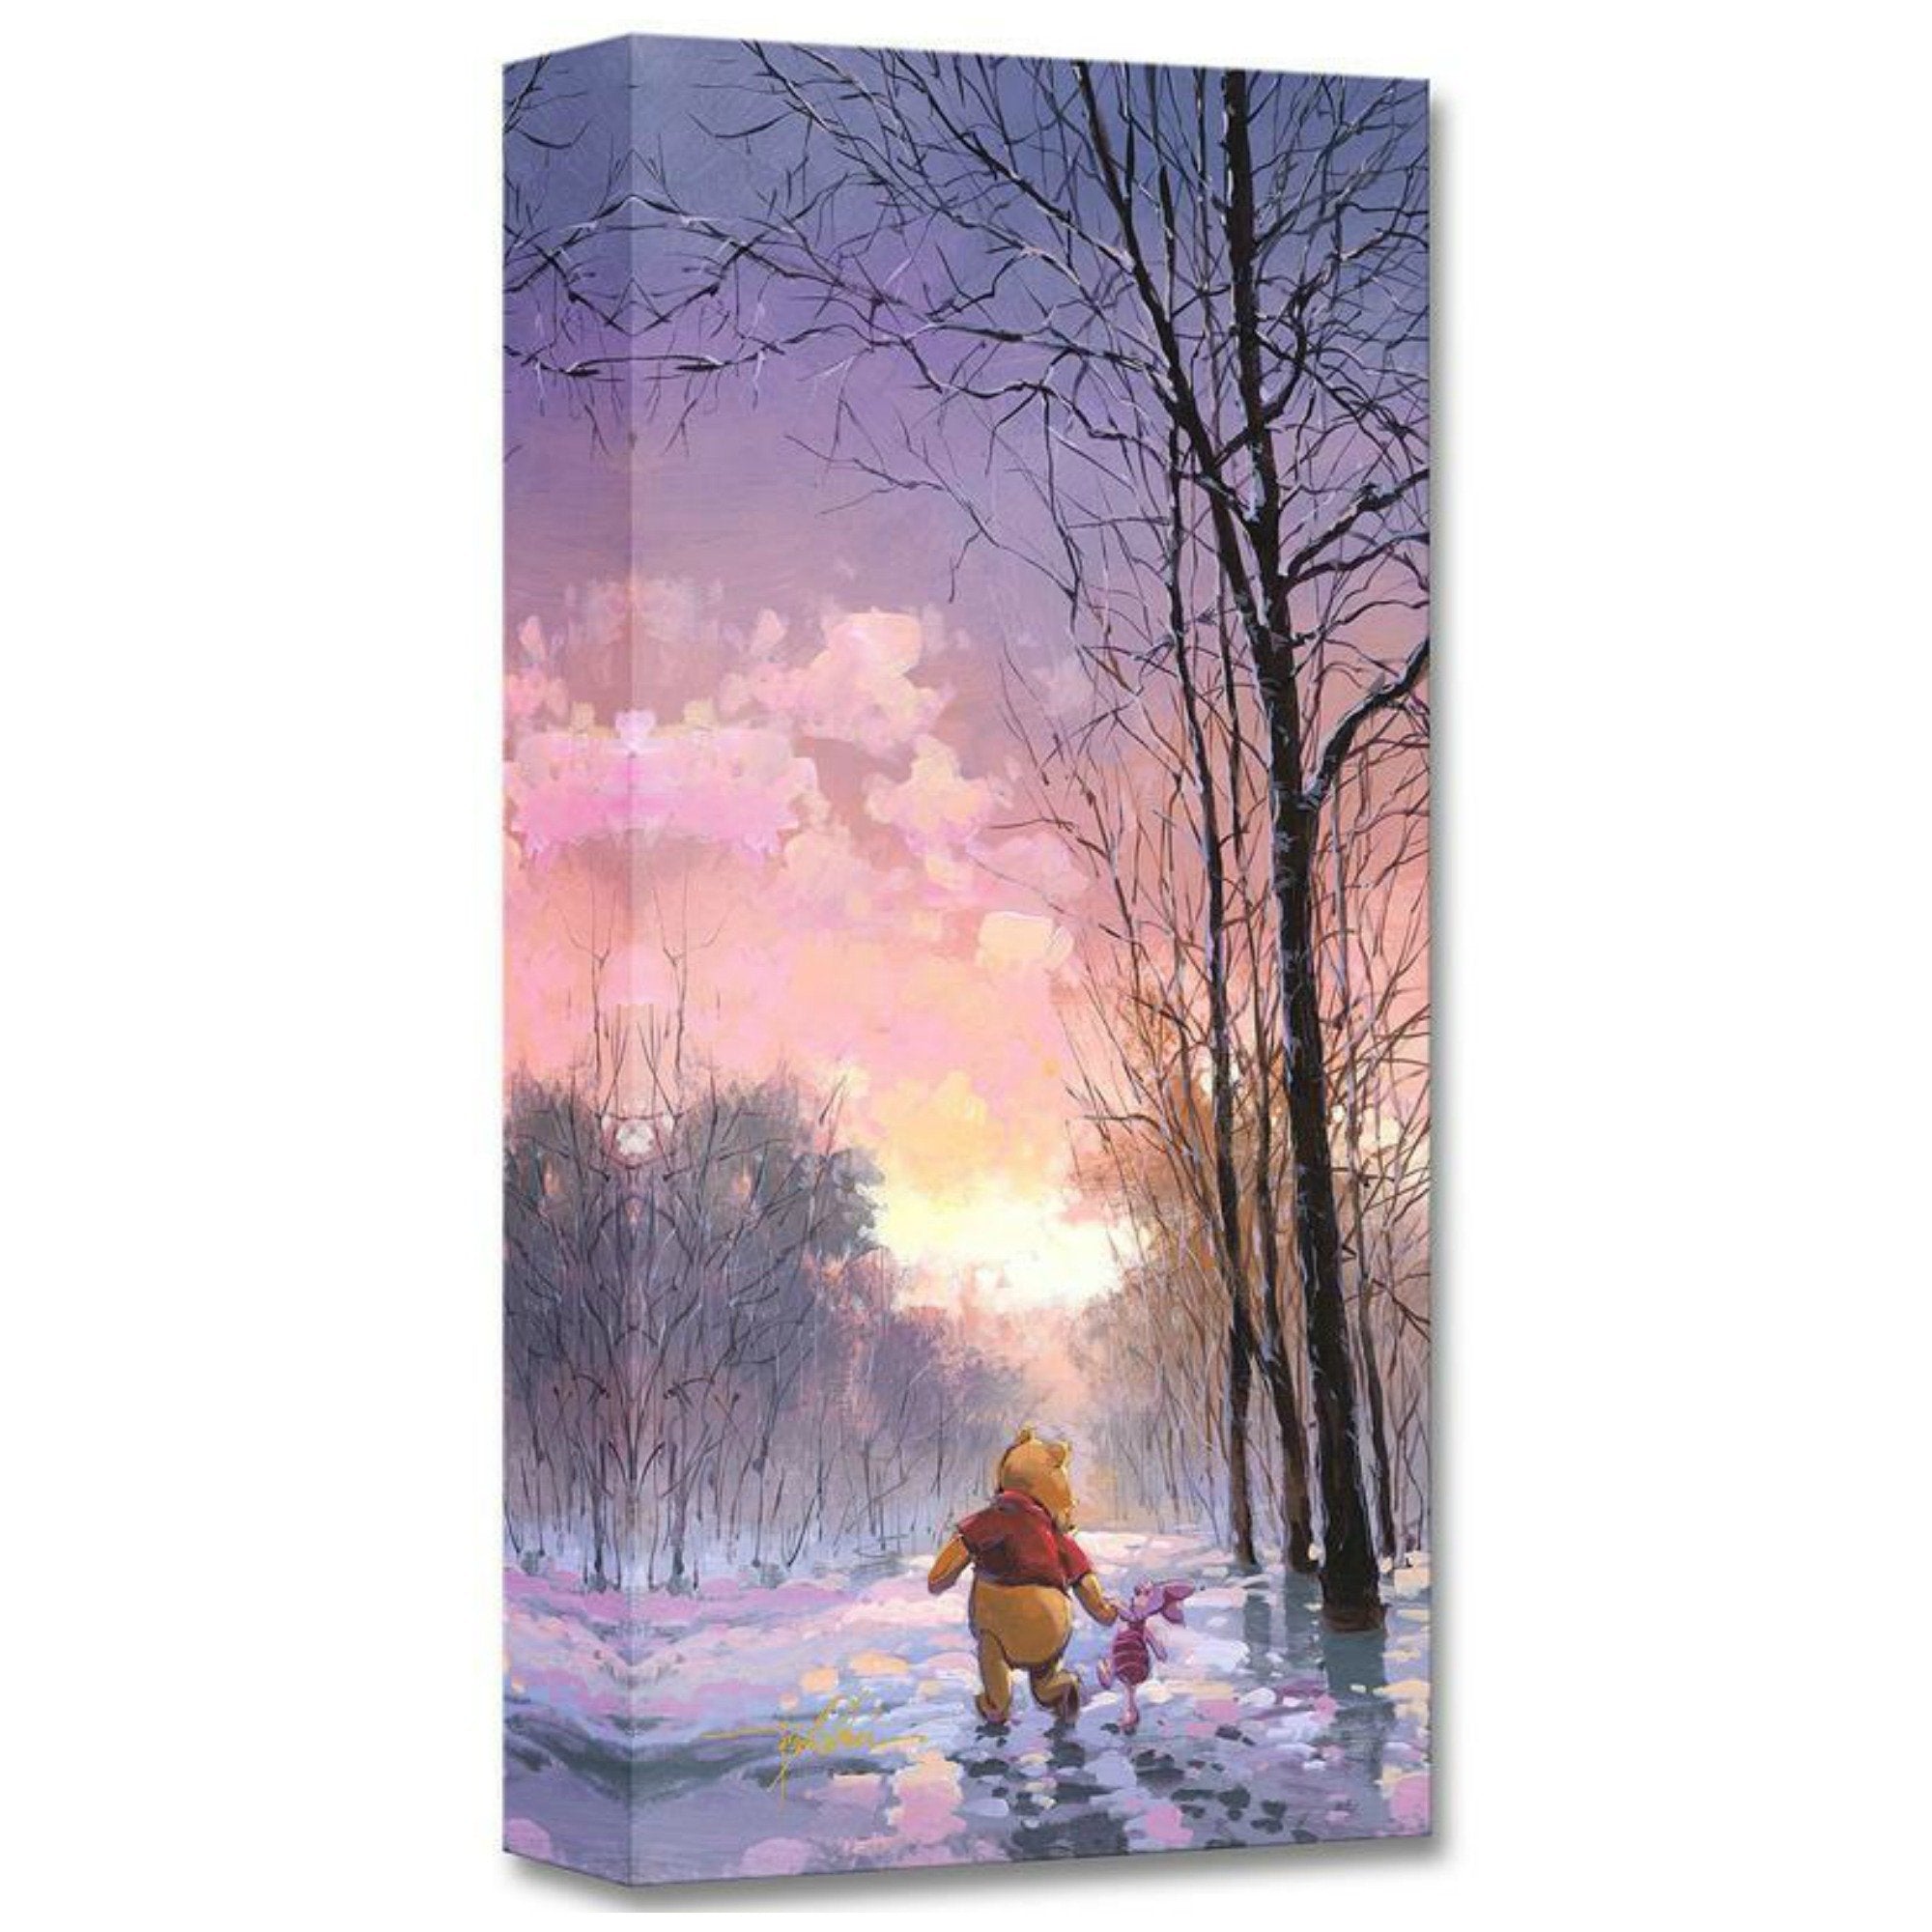 Snowy Path by Rodel Gonzalez  Winnie the Pooh and his friend Piglet take a winter day stroll through a snowy path.